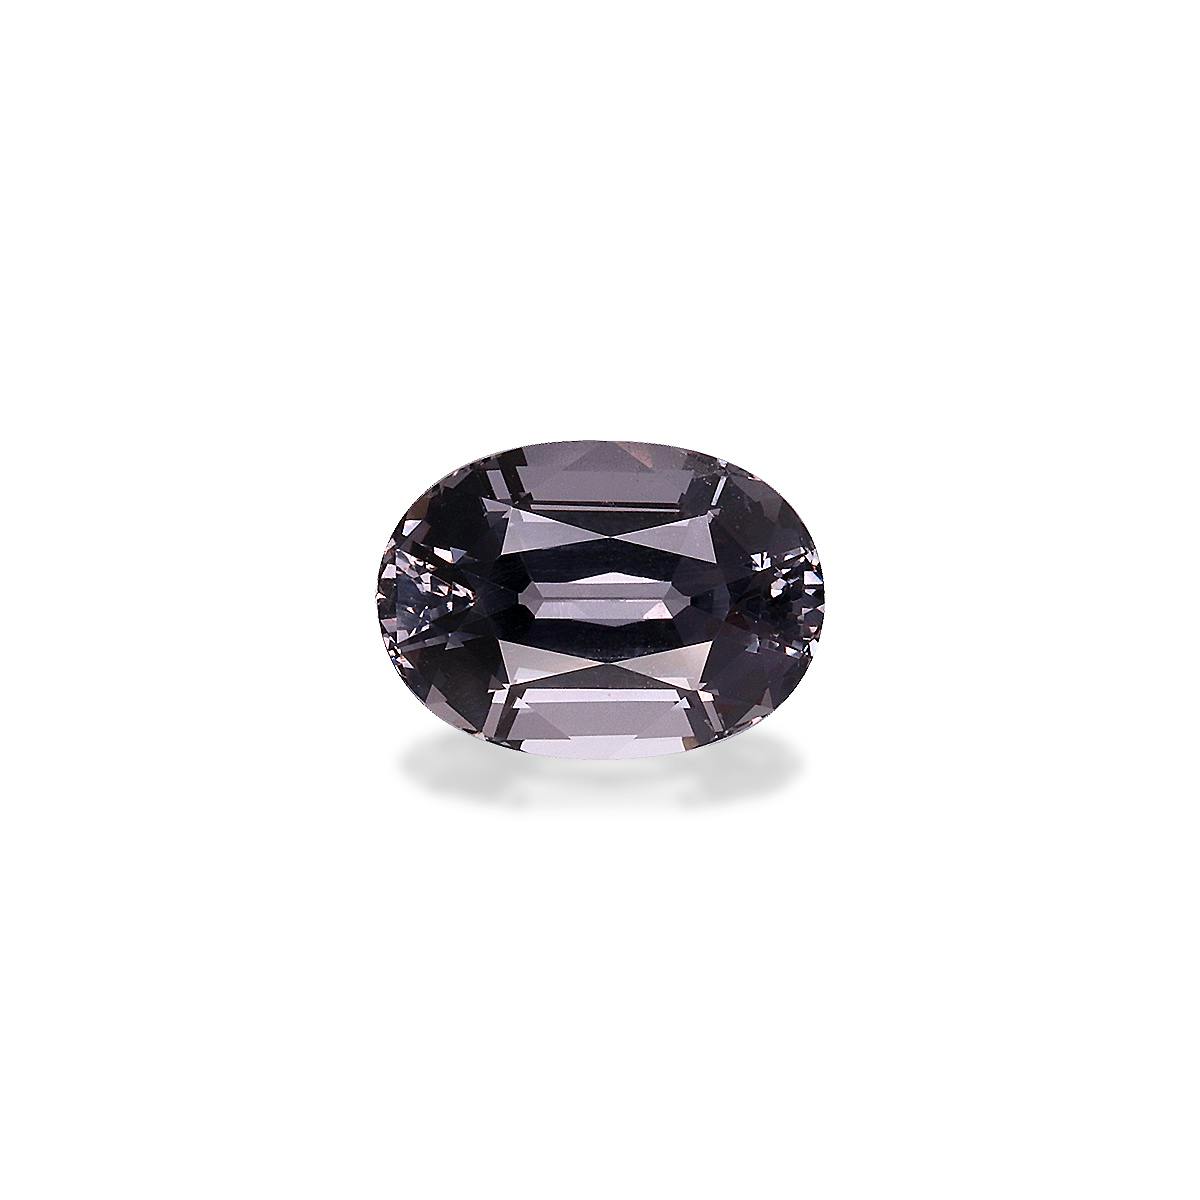 Grey Spinel 3.04ct (SP0108)